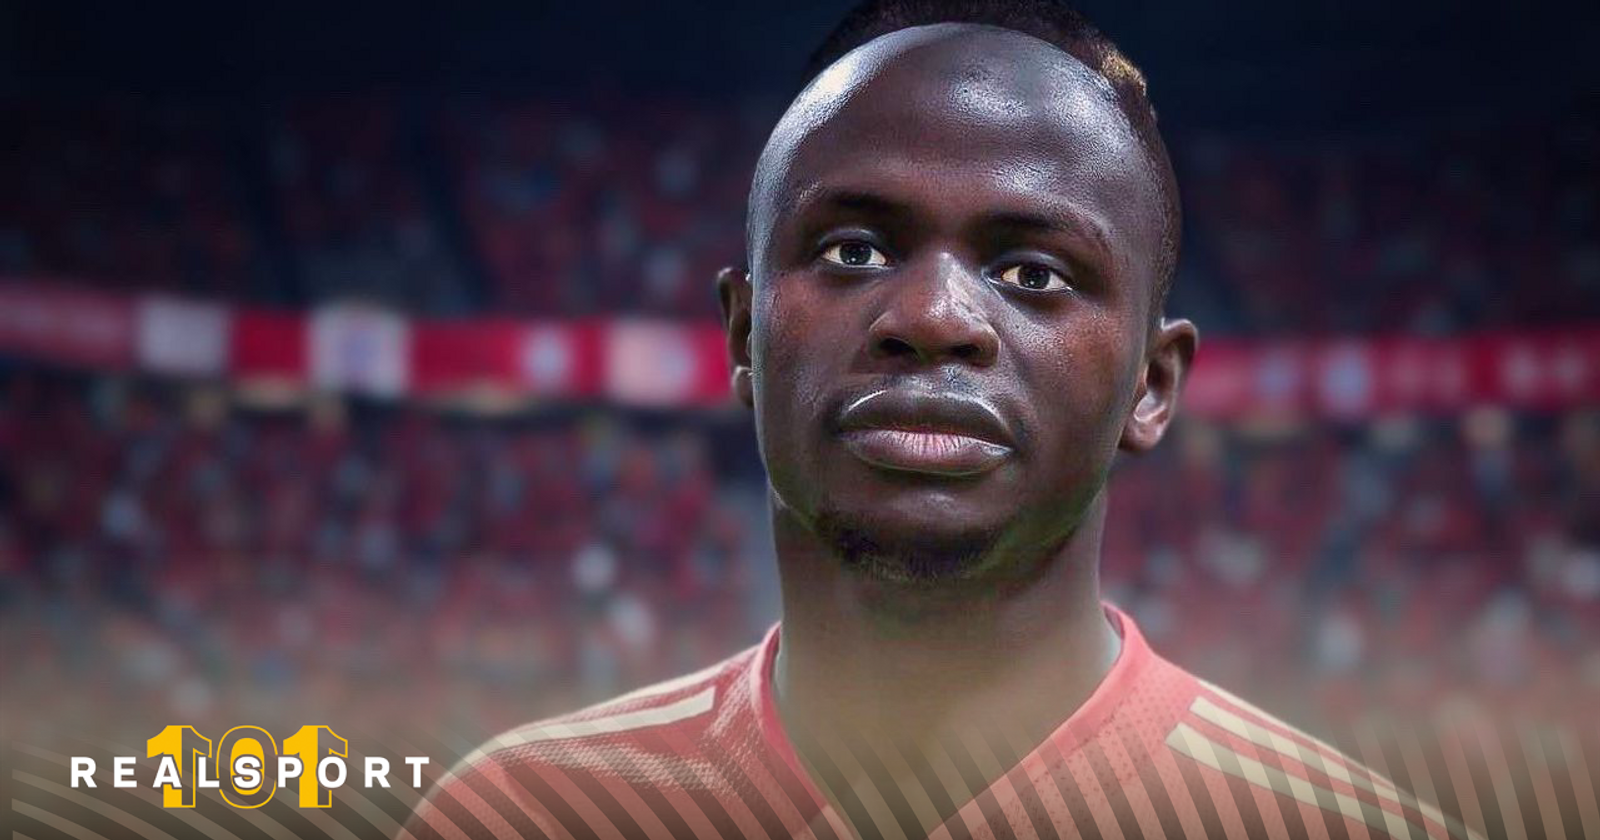 All managers in FIFA 23 Ultimate Team: Brazil, Senegal, USA & more